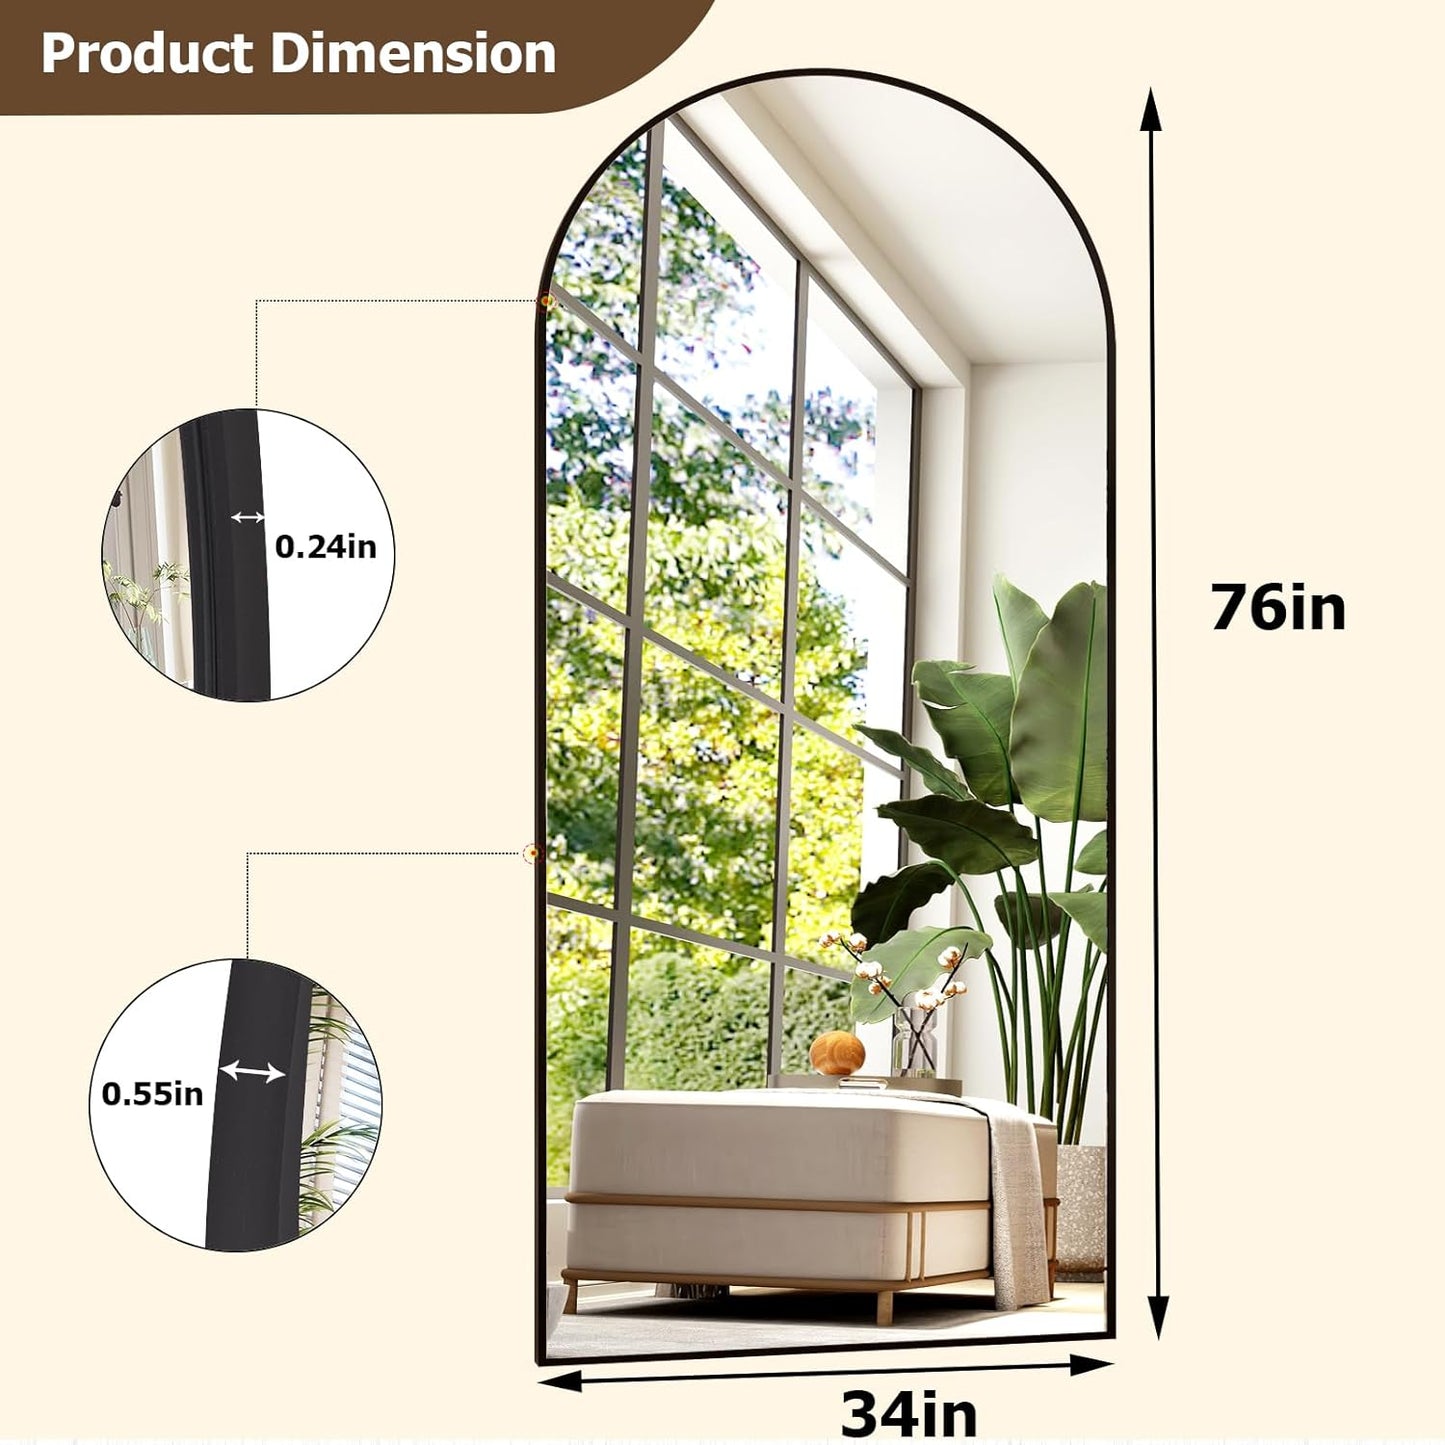 -34X76 Inch Wall Mount Arched Full Length Mirror-Aluminum Alloy Frame High Definition-Full Body Mirror for Bedroom or Living Room,Black - Design By Technique